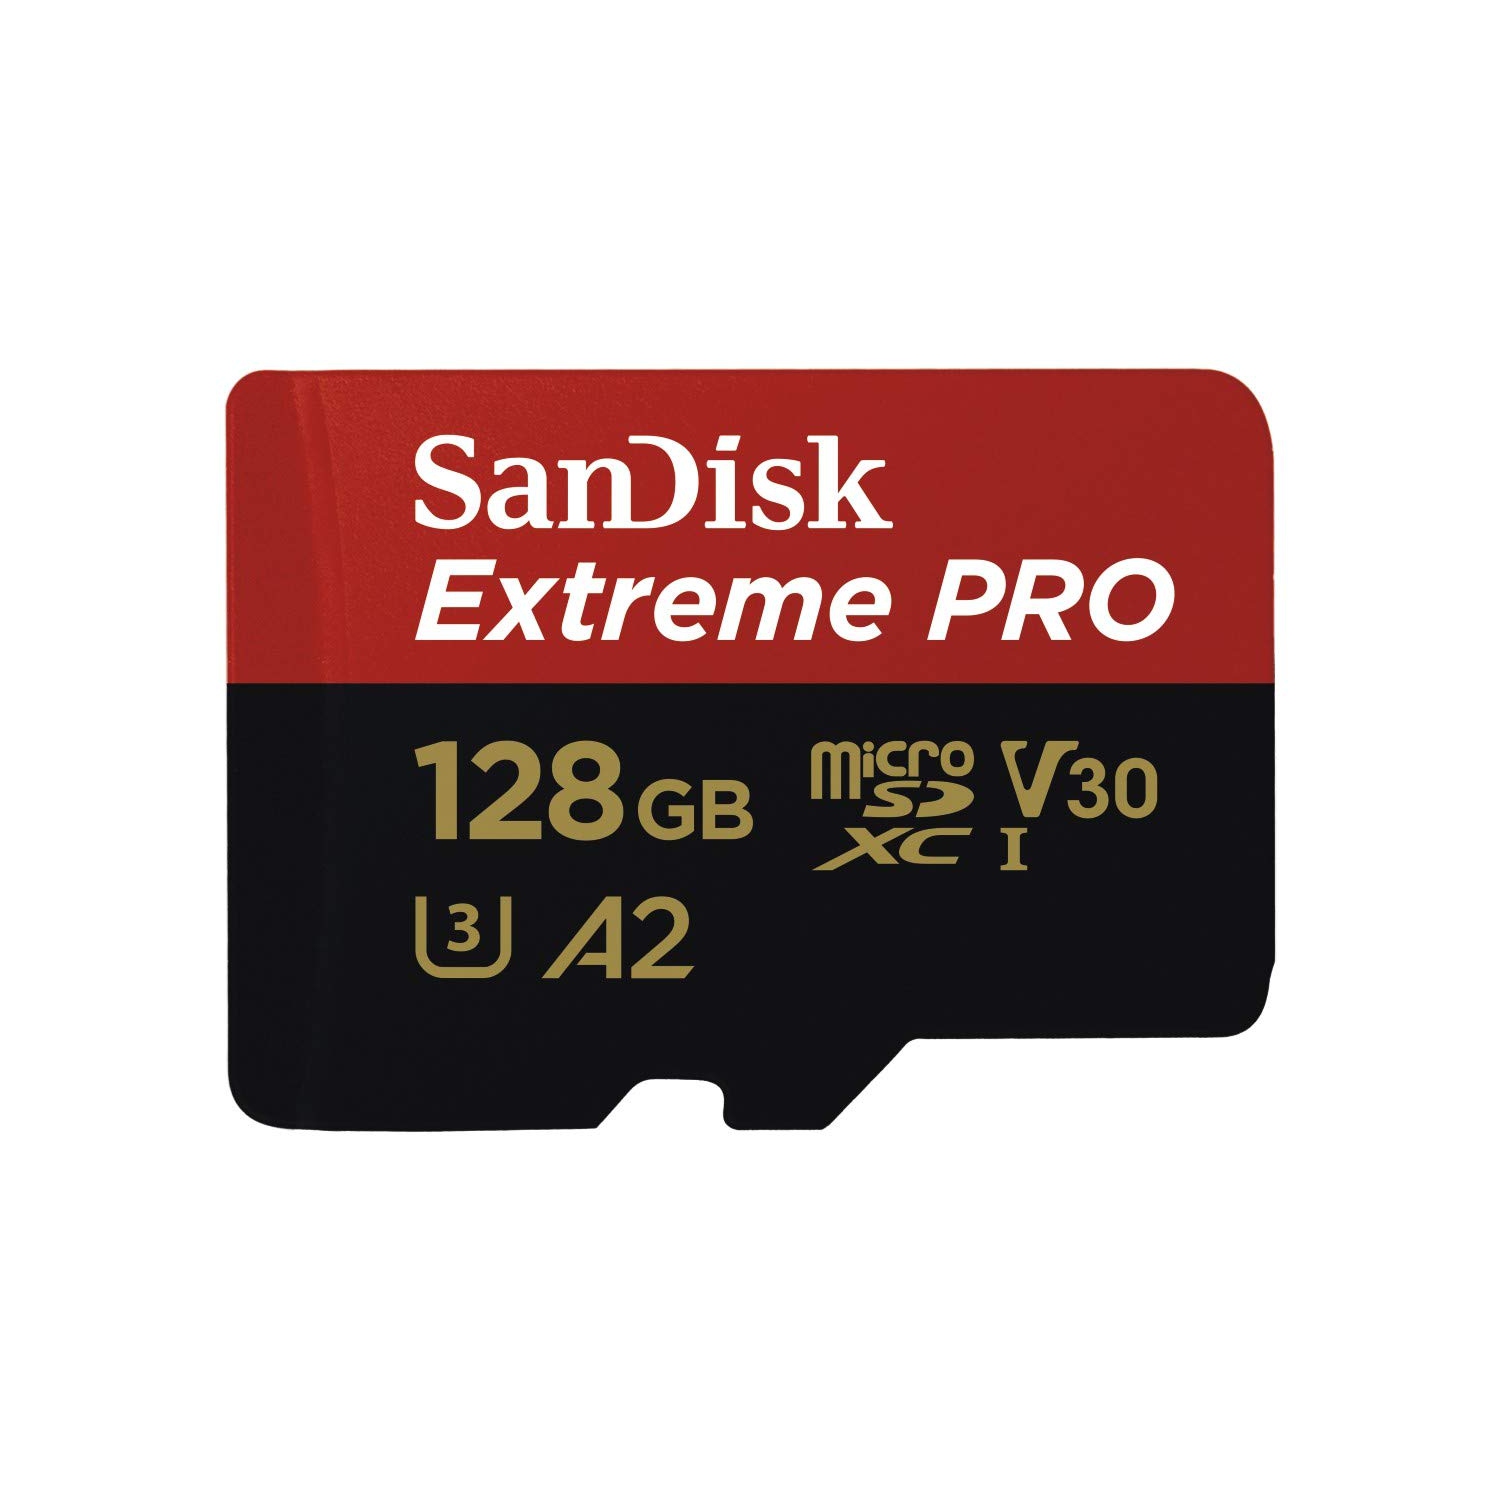 SanDisk Extreme PRO 128GB Micro SD Card with Adapter SDSQXCD-128G